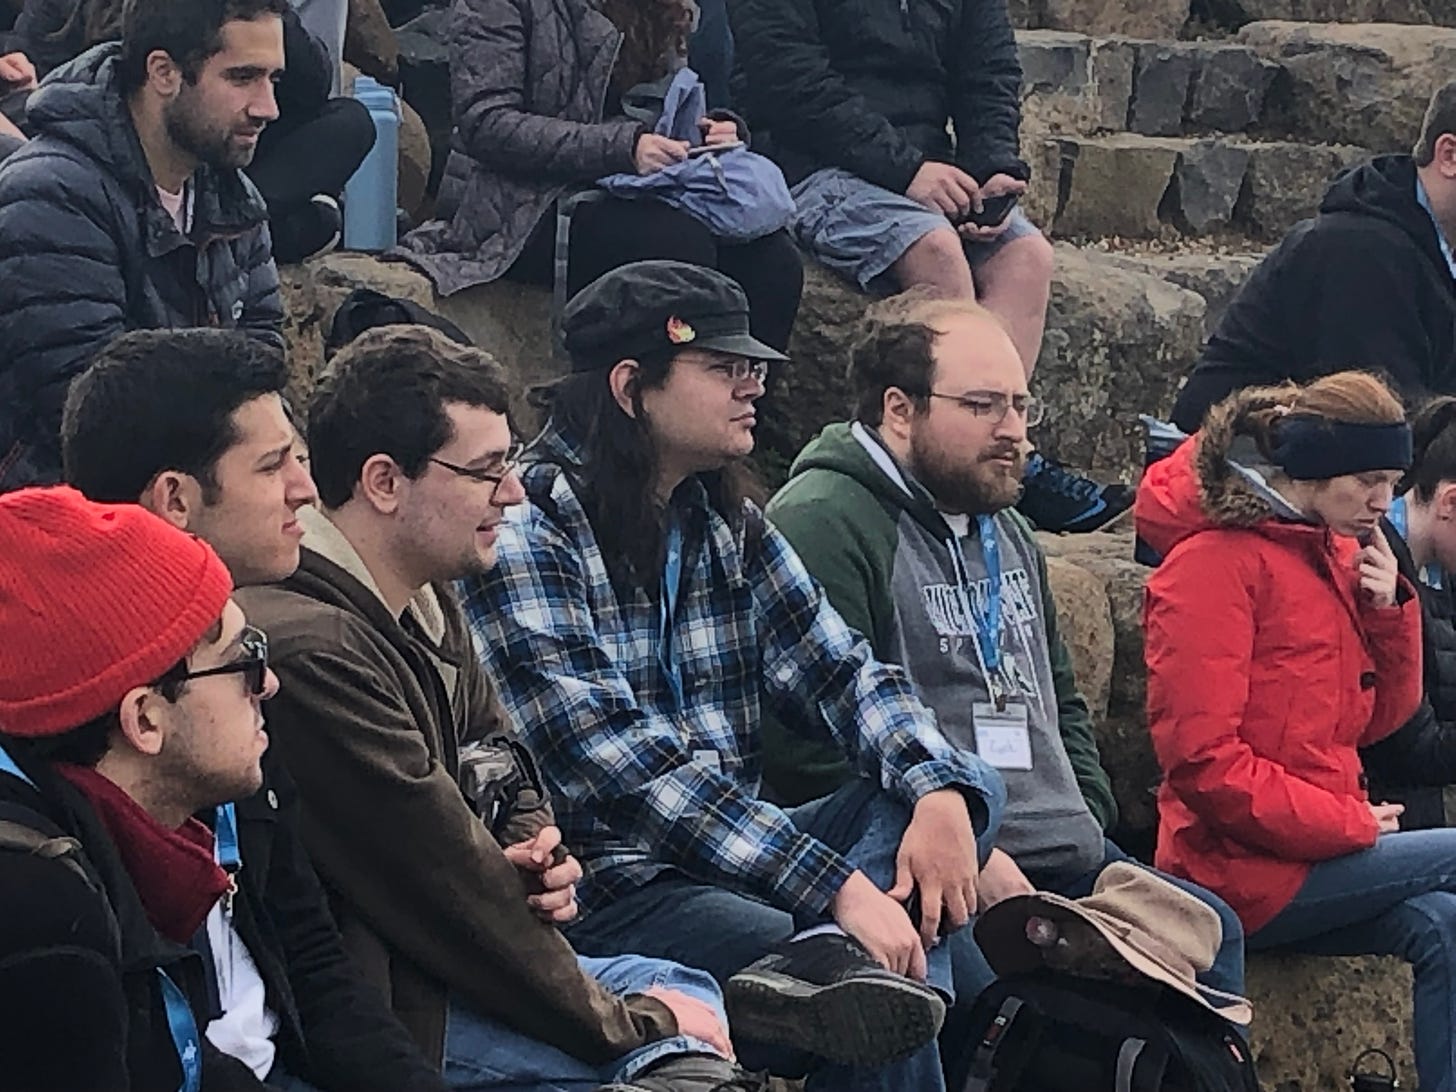 trip participants sit in an ampitheater